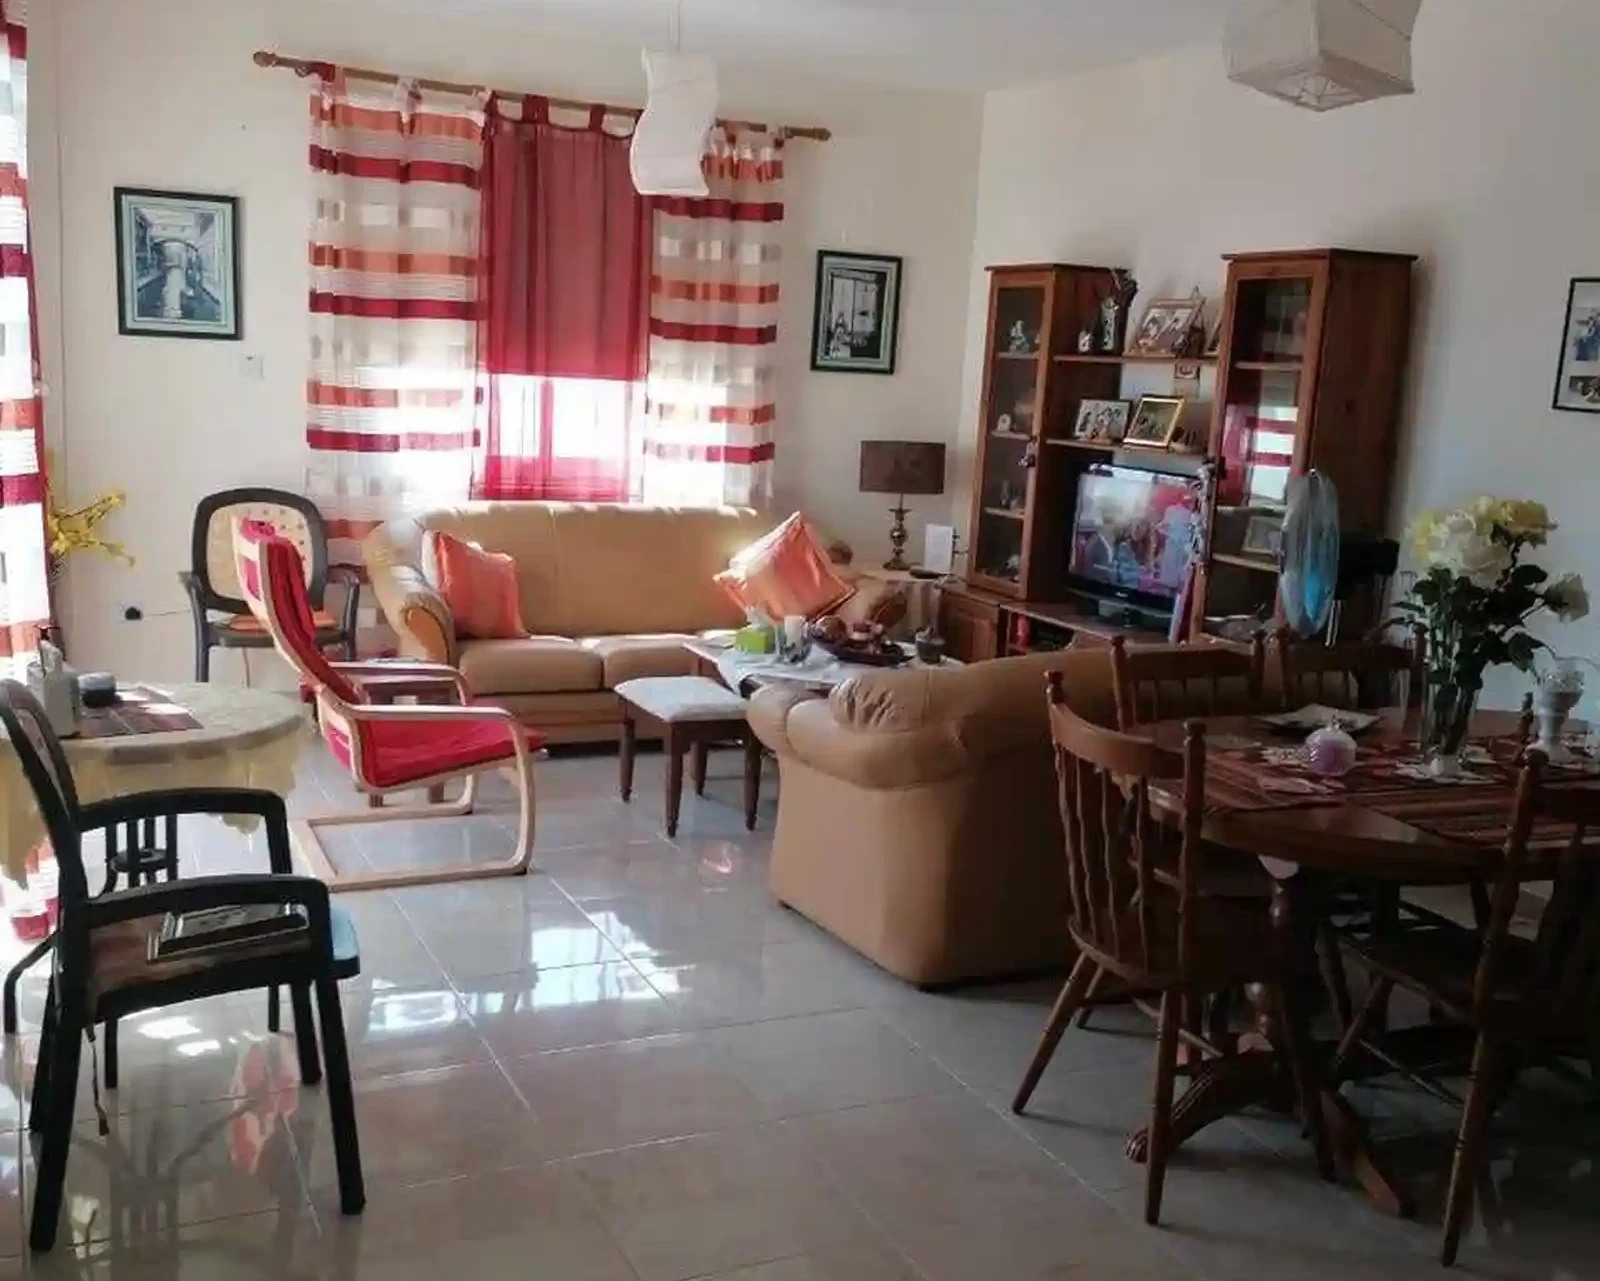 3-bedroom apartment fоr sаle €144.000, image 1